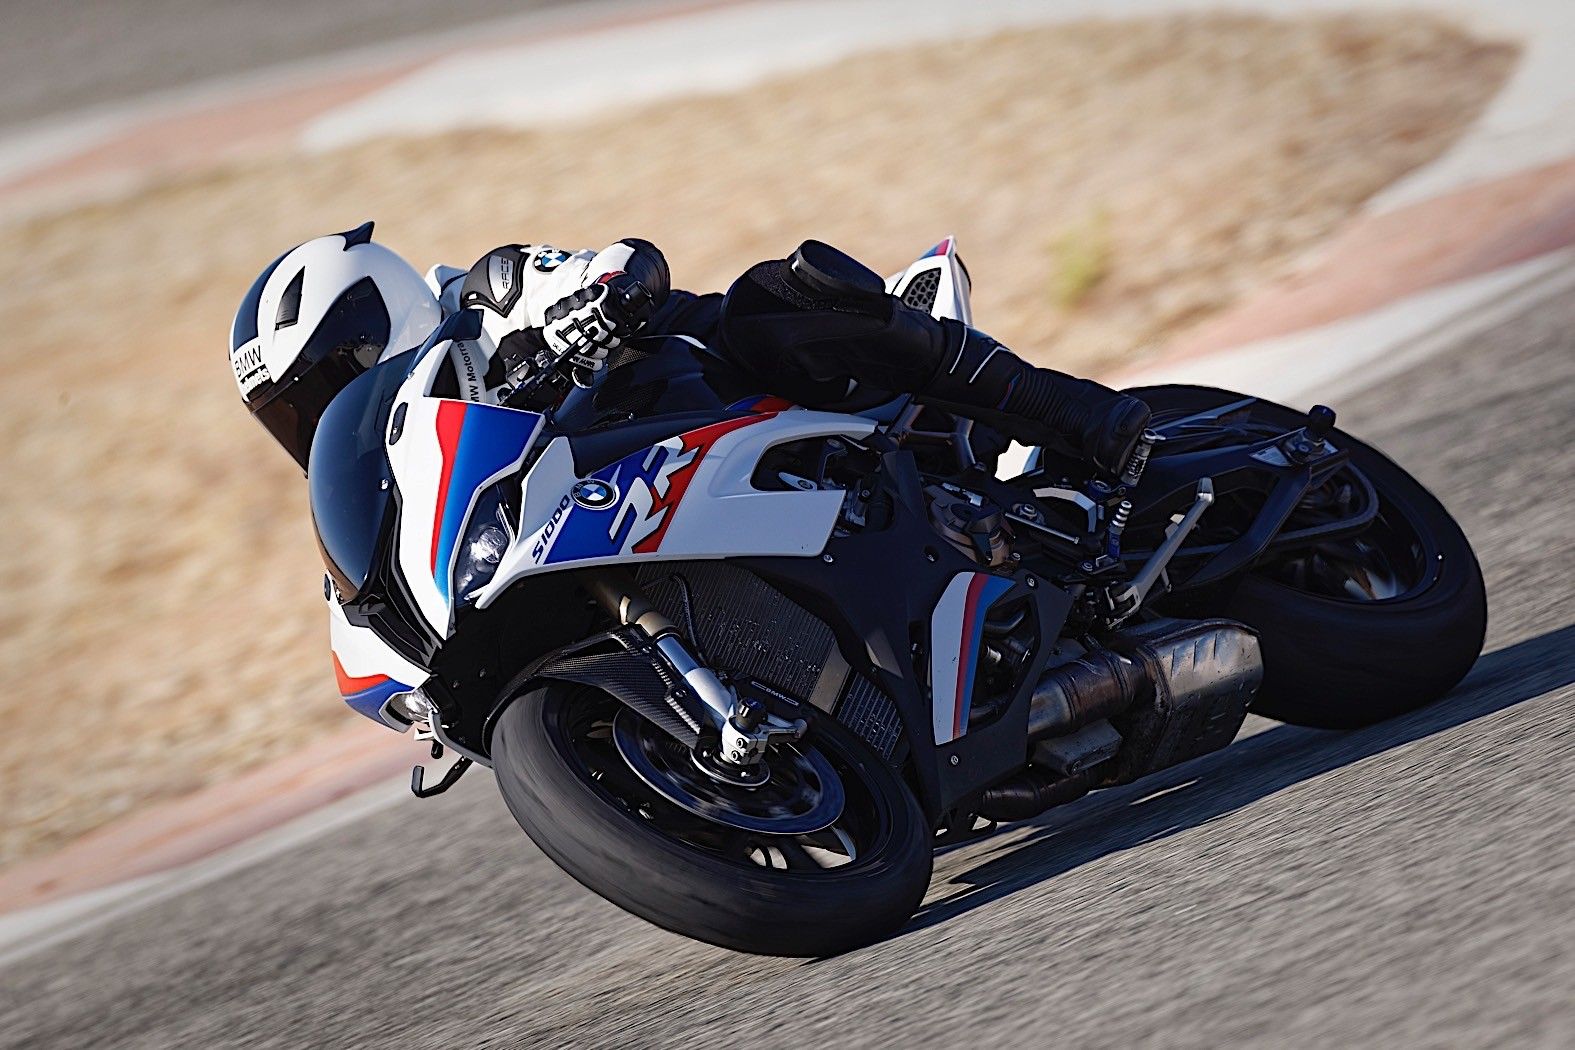 BMW S 1000 RR Revealed with New Engine and M Performance Parts